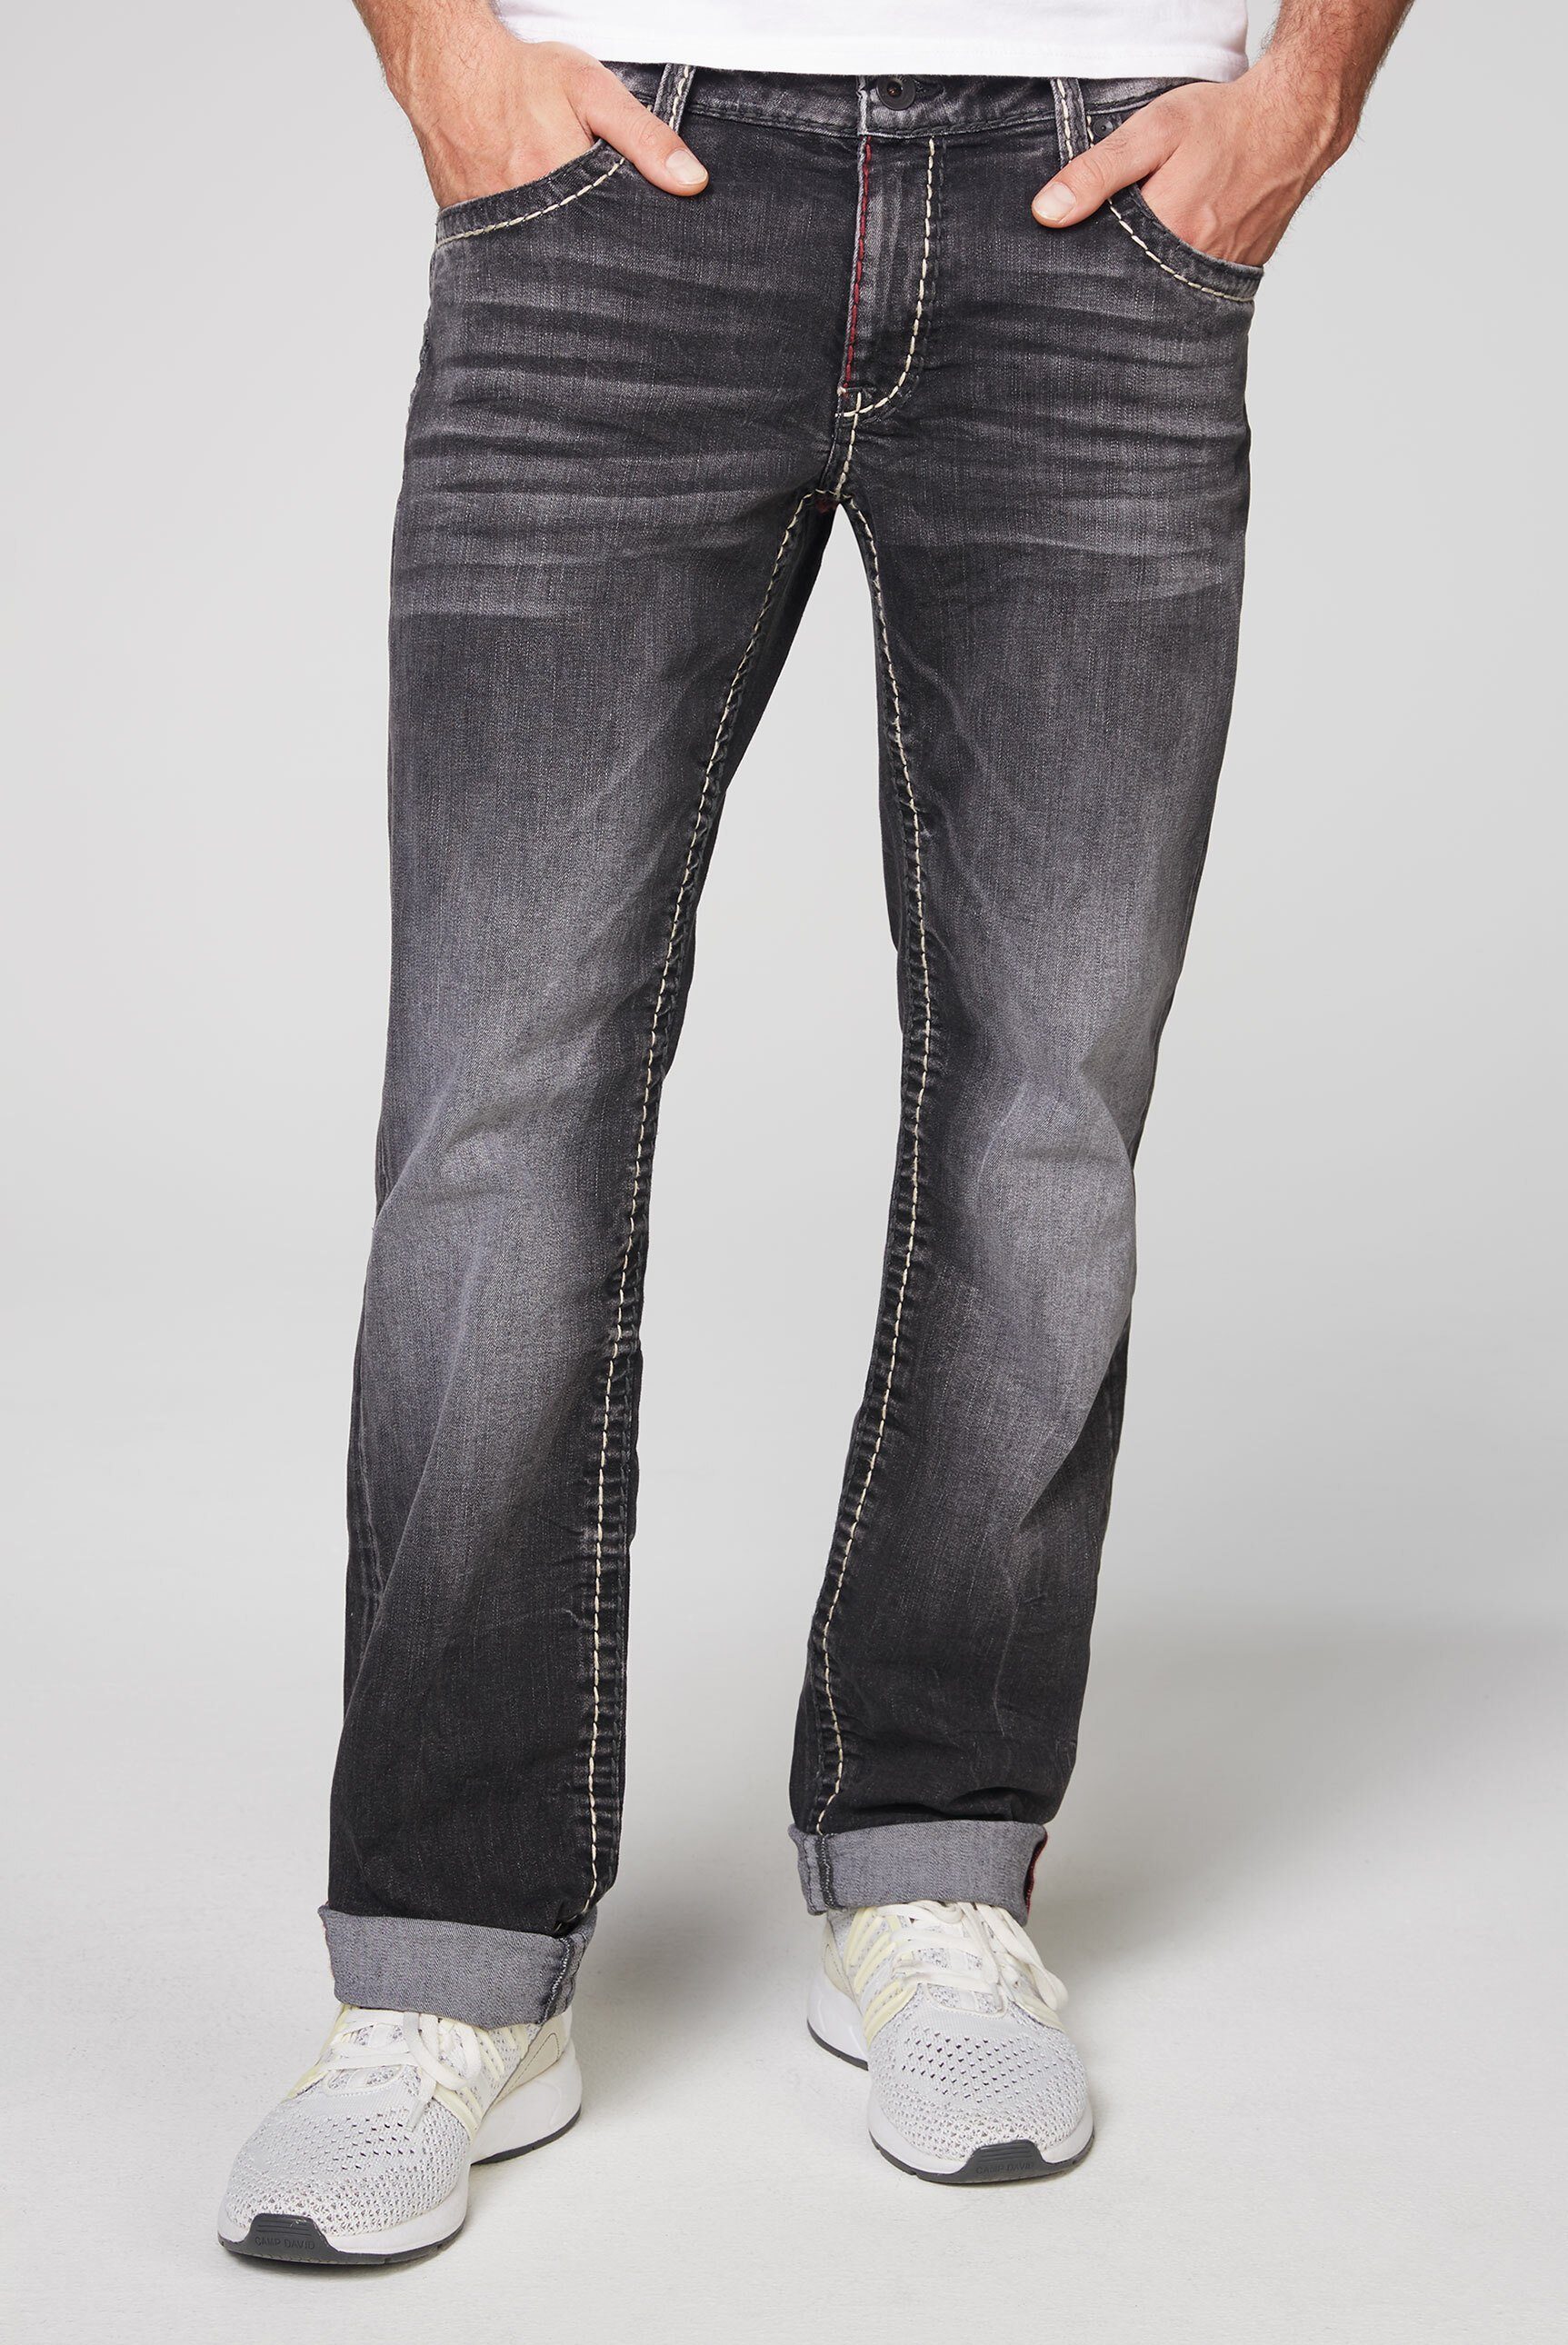 CAMP DAVID Comfort-fit-Jeans mit normaler Leibhöhe | OTTO